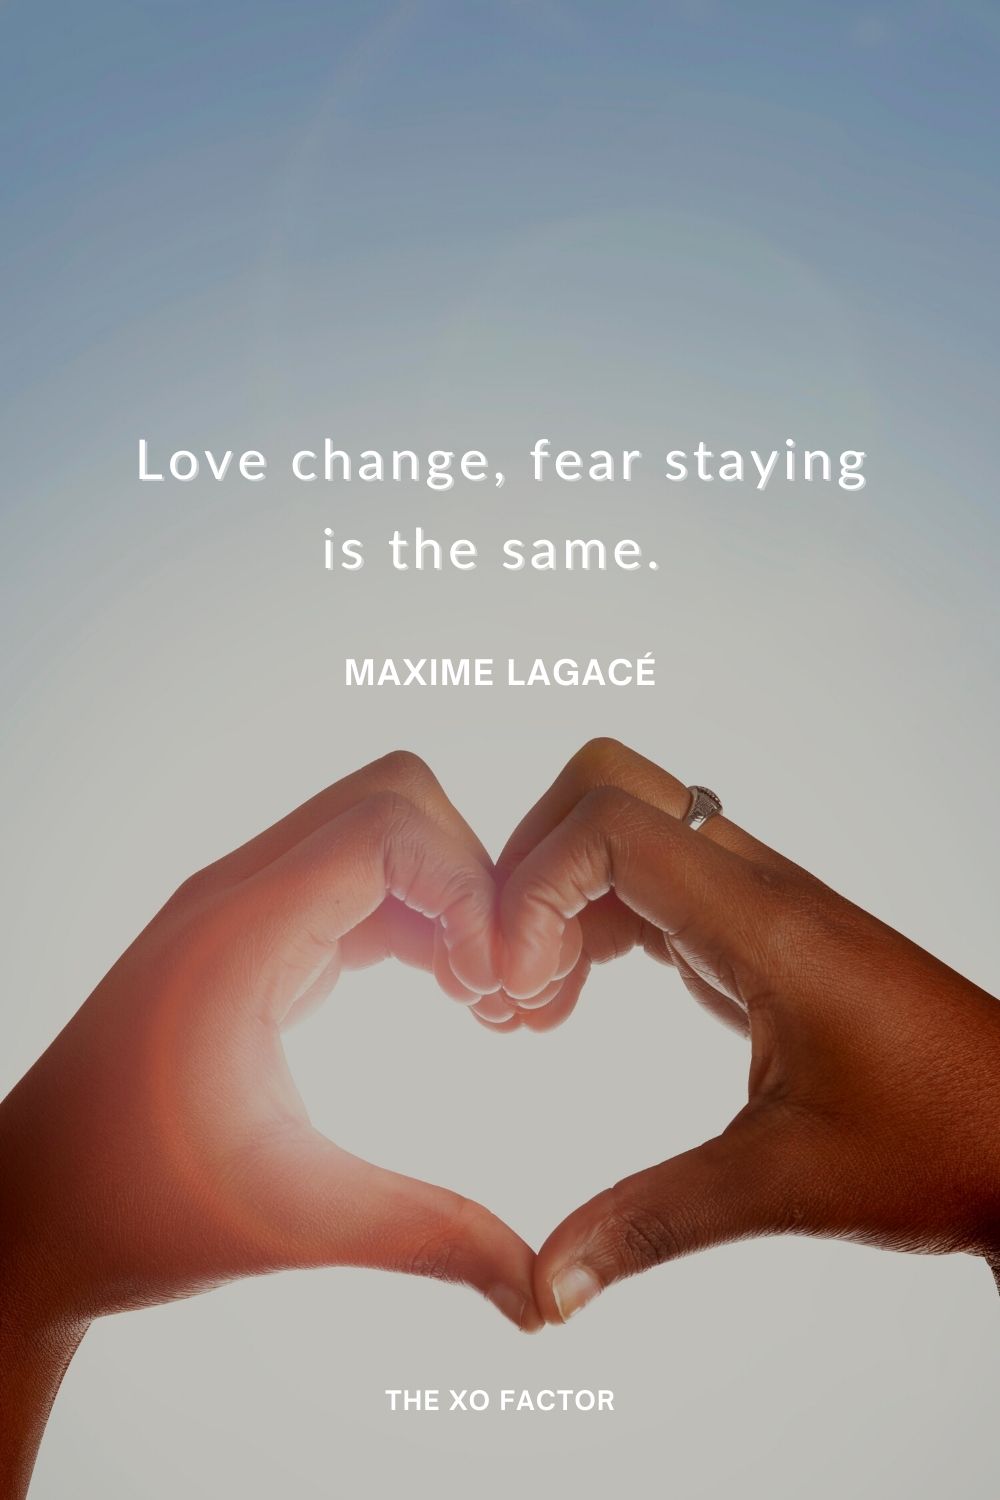 Love change, fear staying the same. 